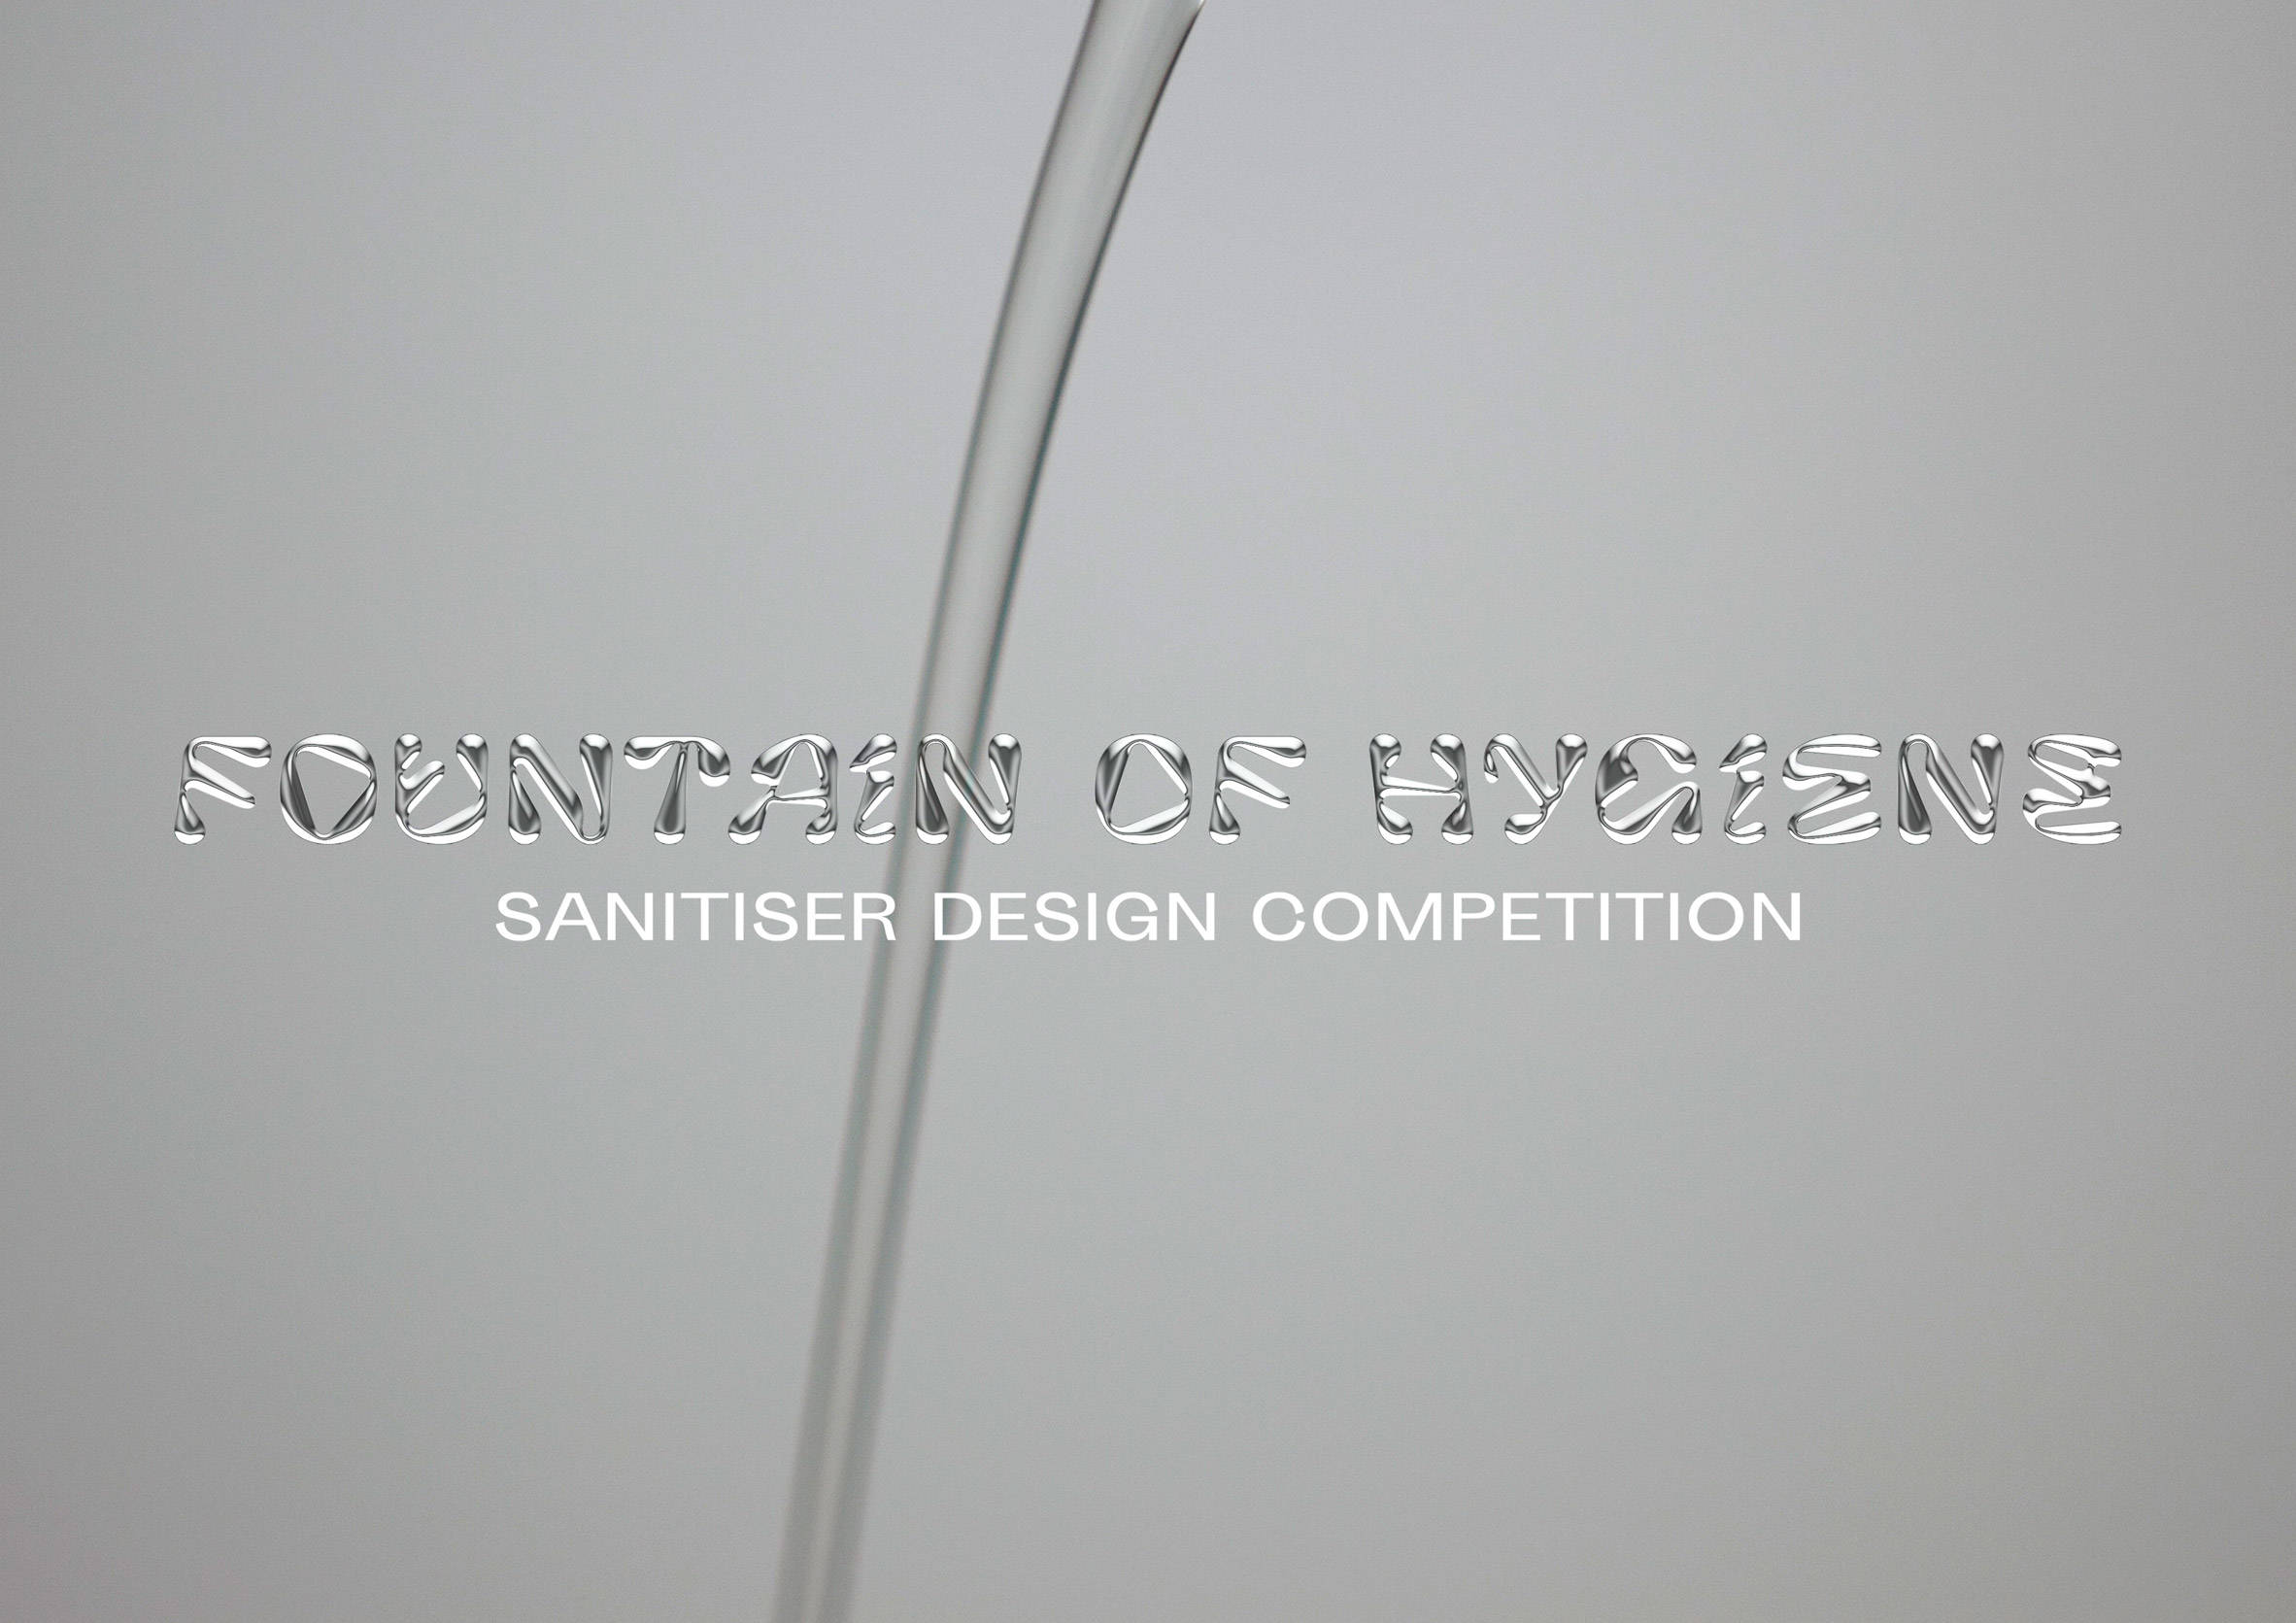 Fountain of Hygiene hand sanitiser competition 